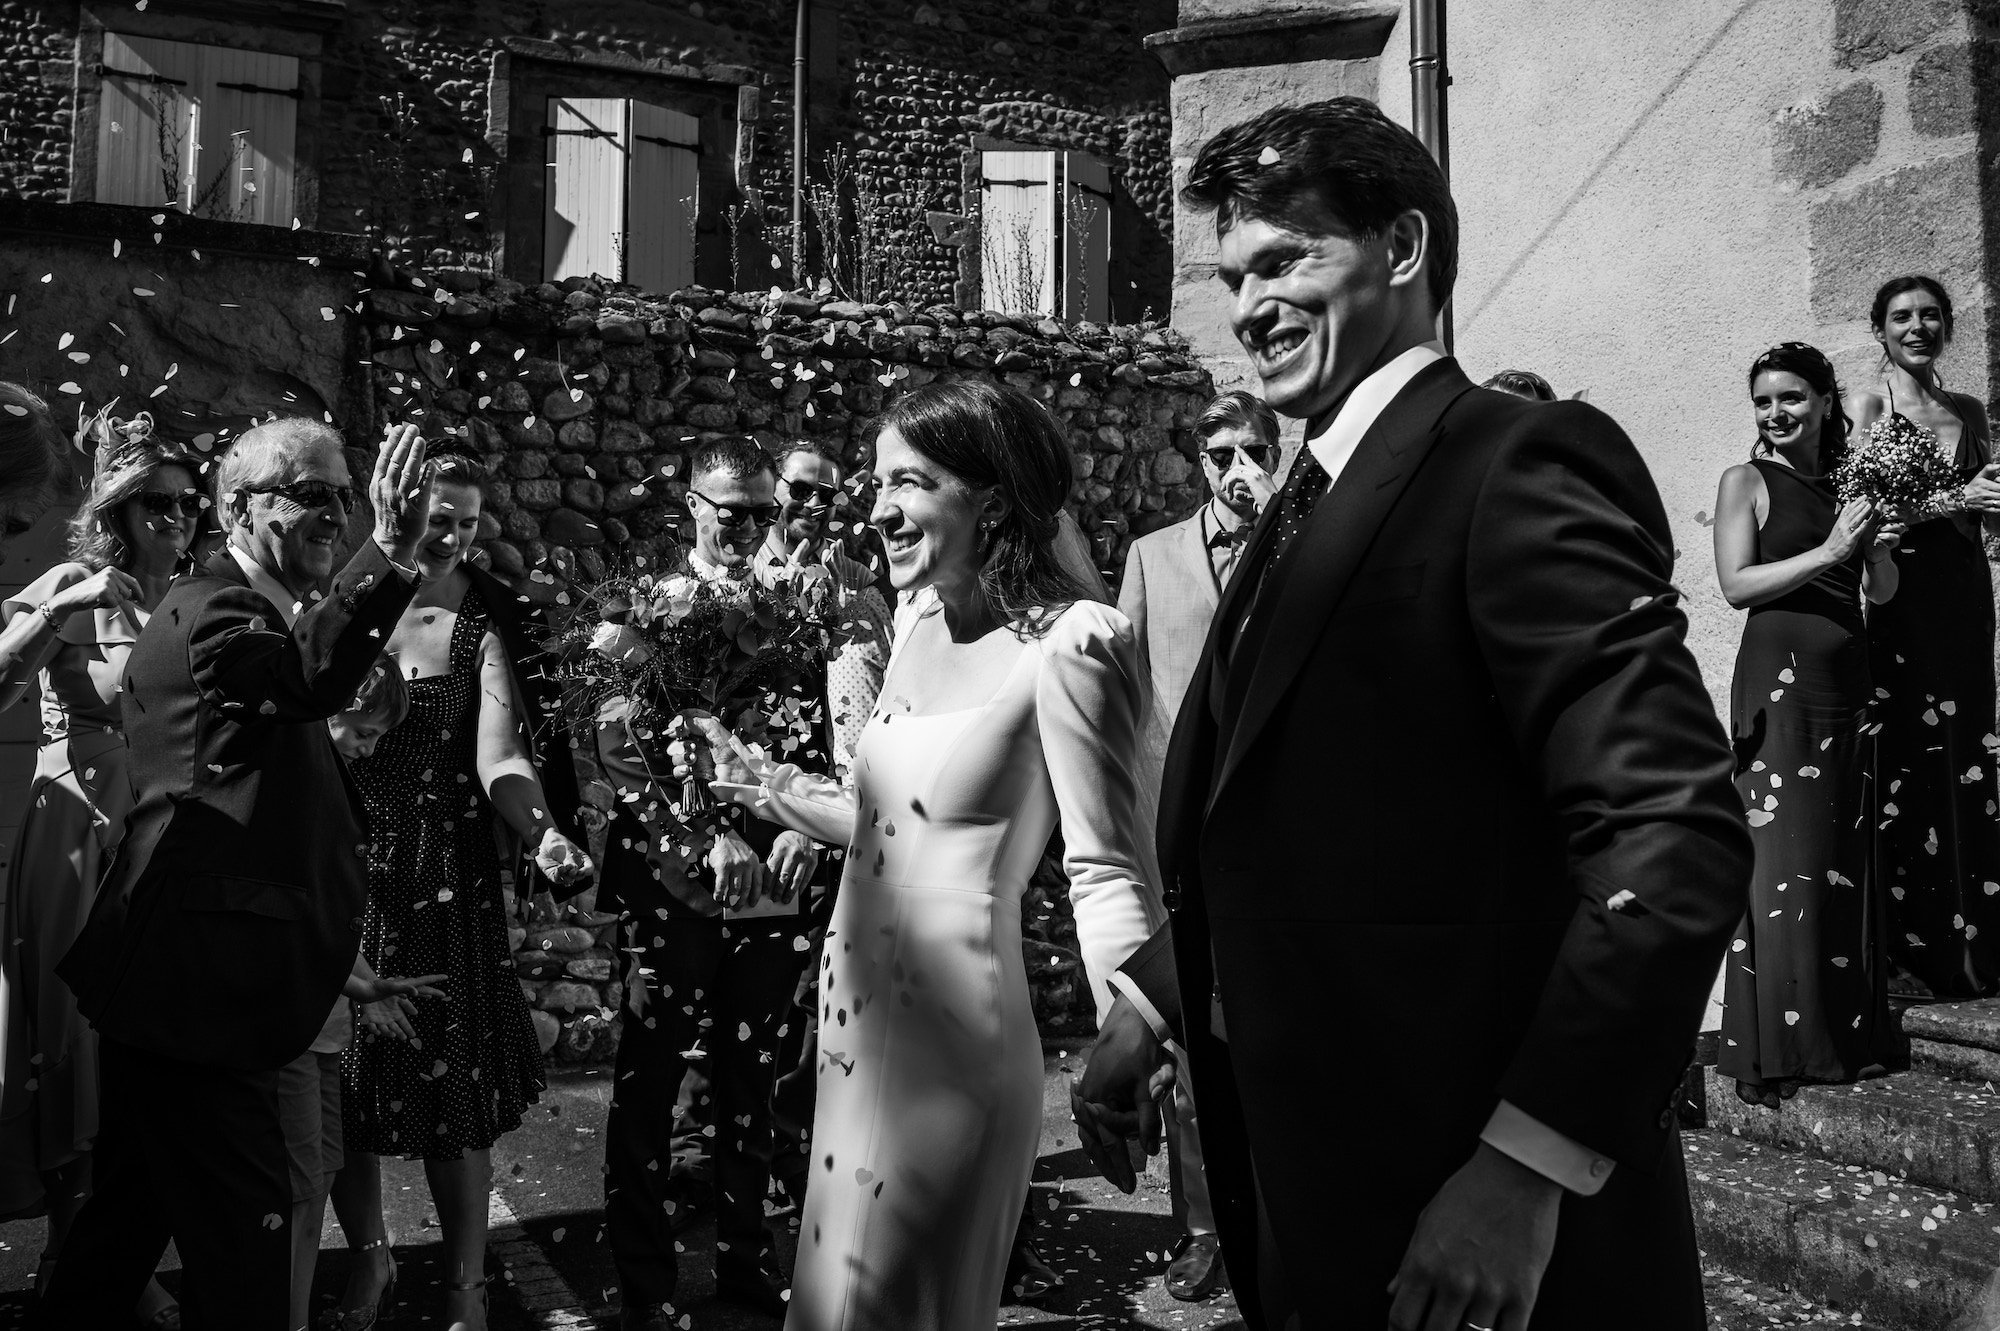 Beautiful bride Marie-Claire wore the Foxglove dress | Wedding dress by Halfpenny London